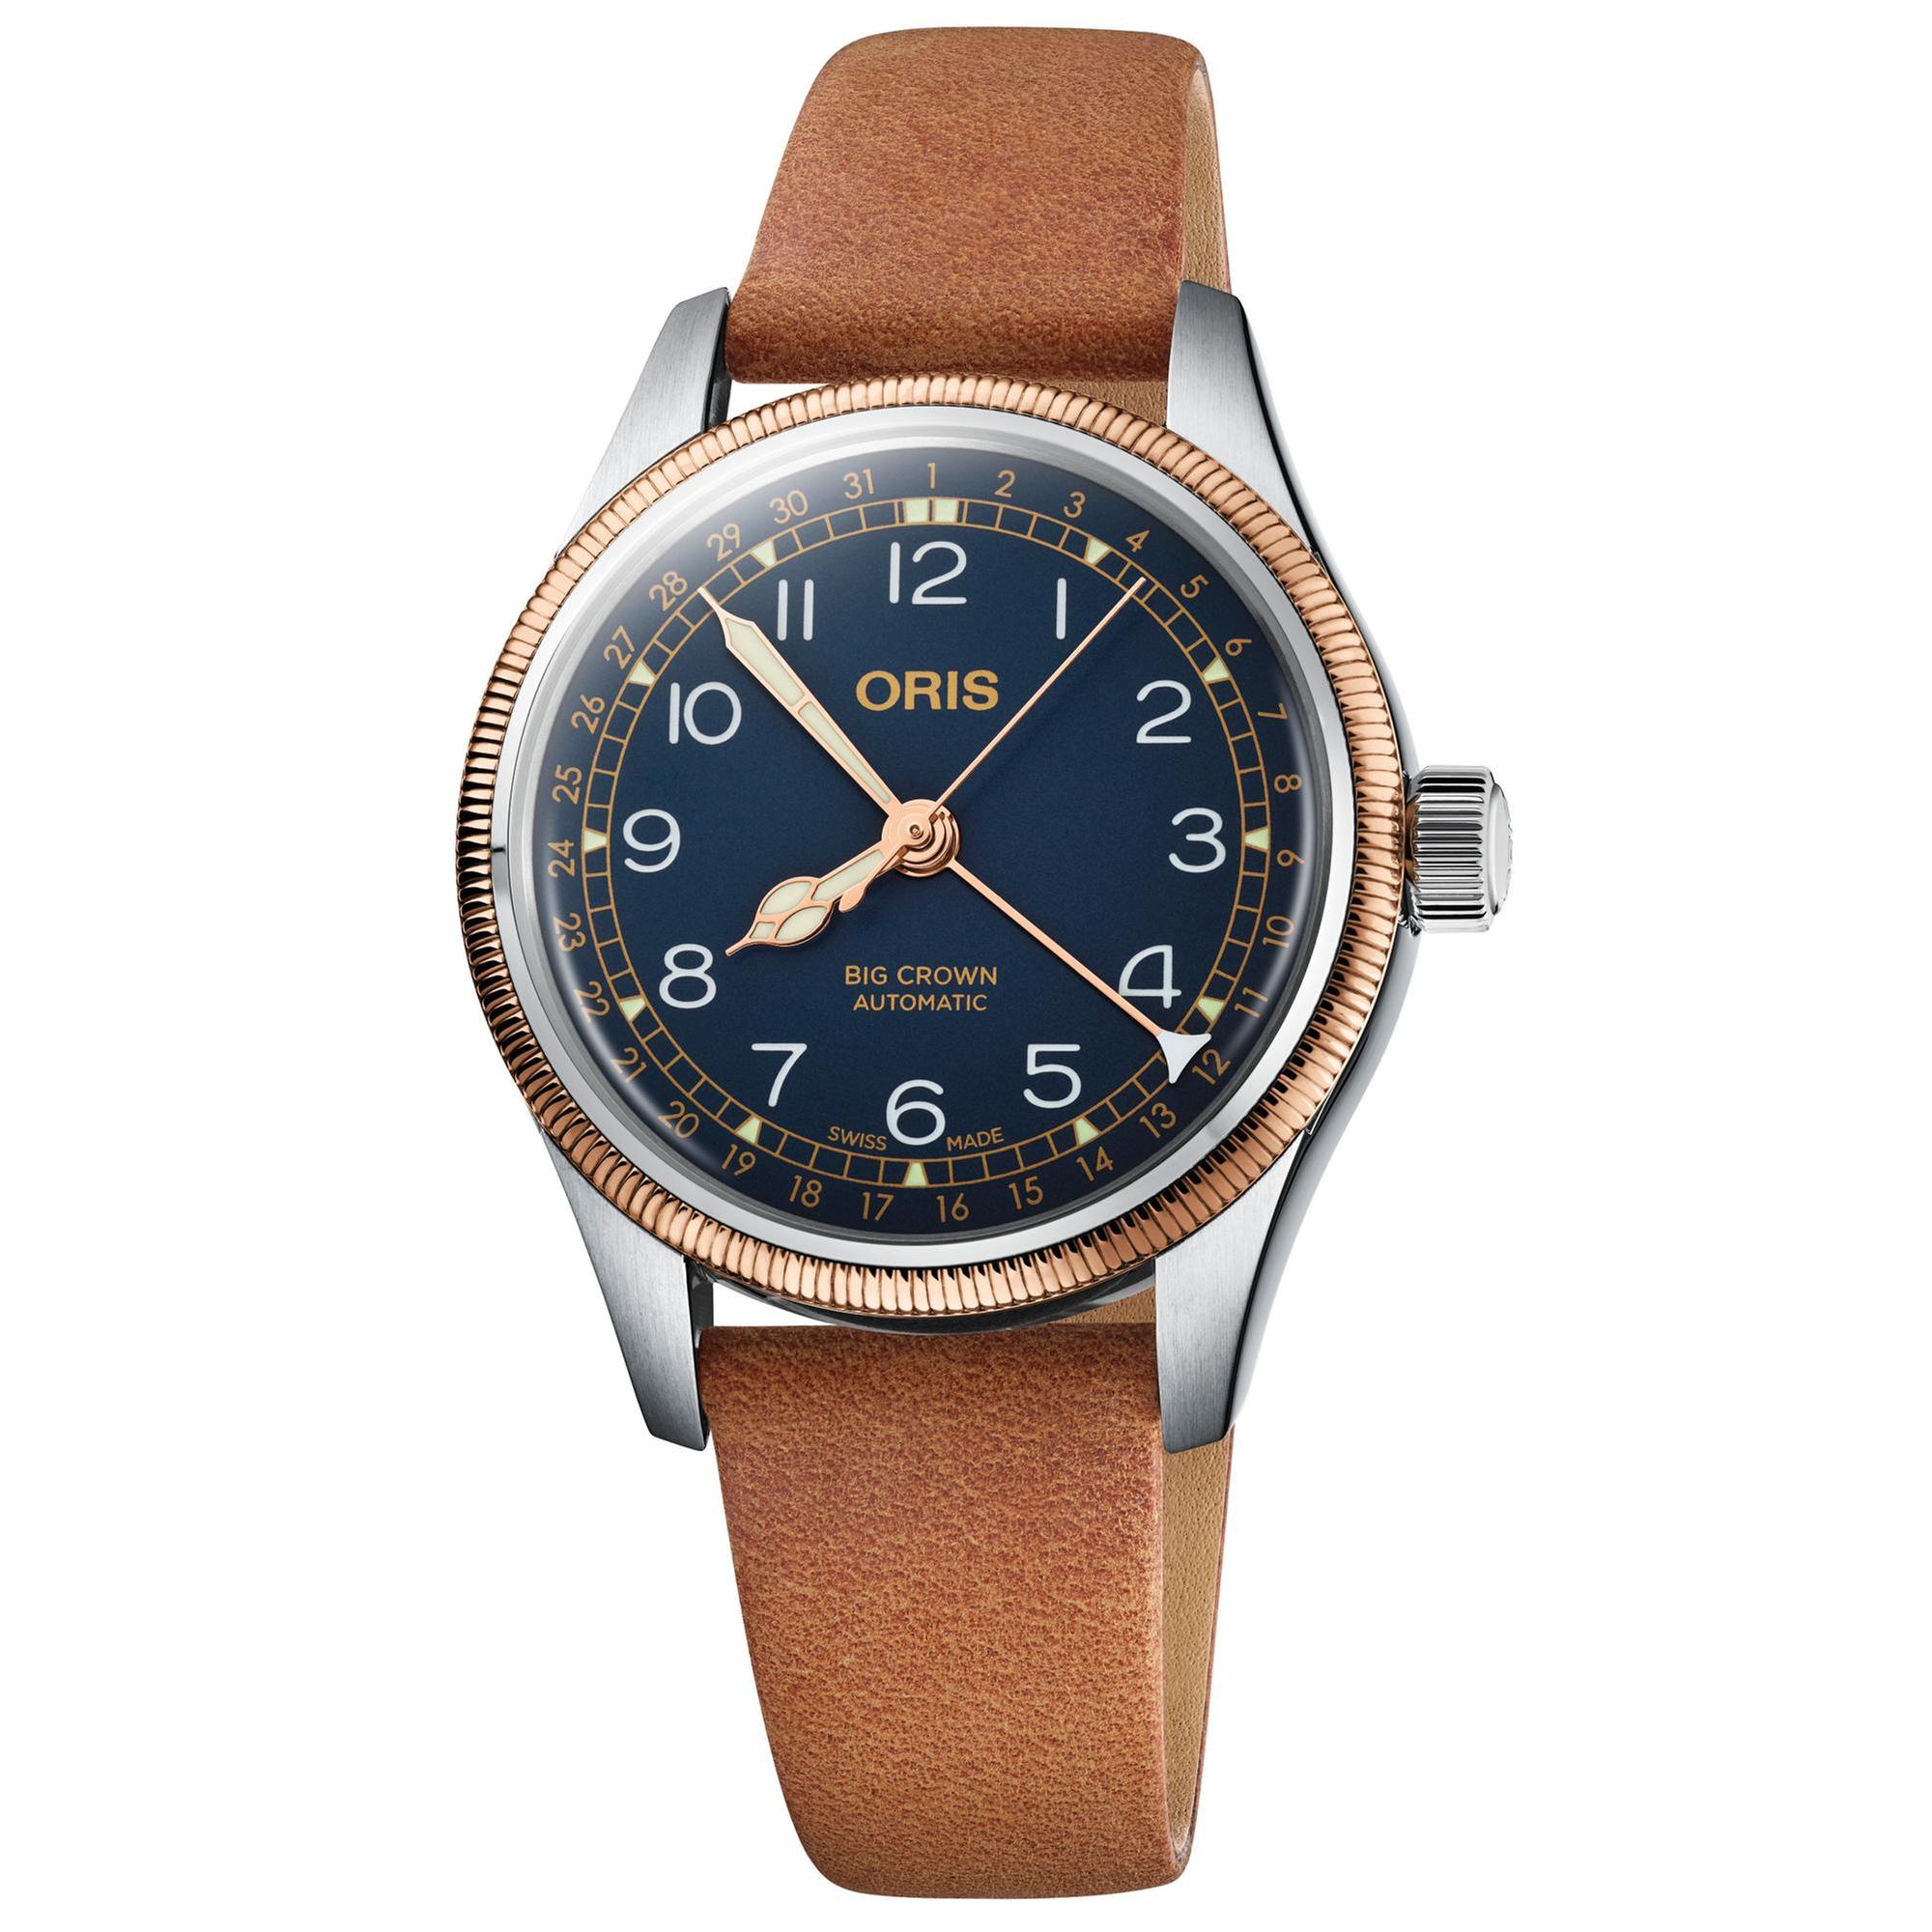 Big Crown Pointer Date Blue Dial Brown Leather Strap Watch | - Oris 01 754 7749 4365-07 5 17 66